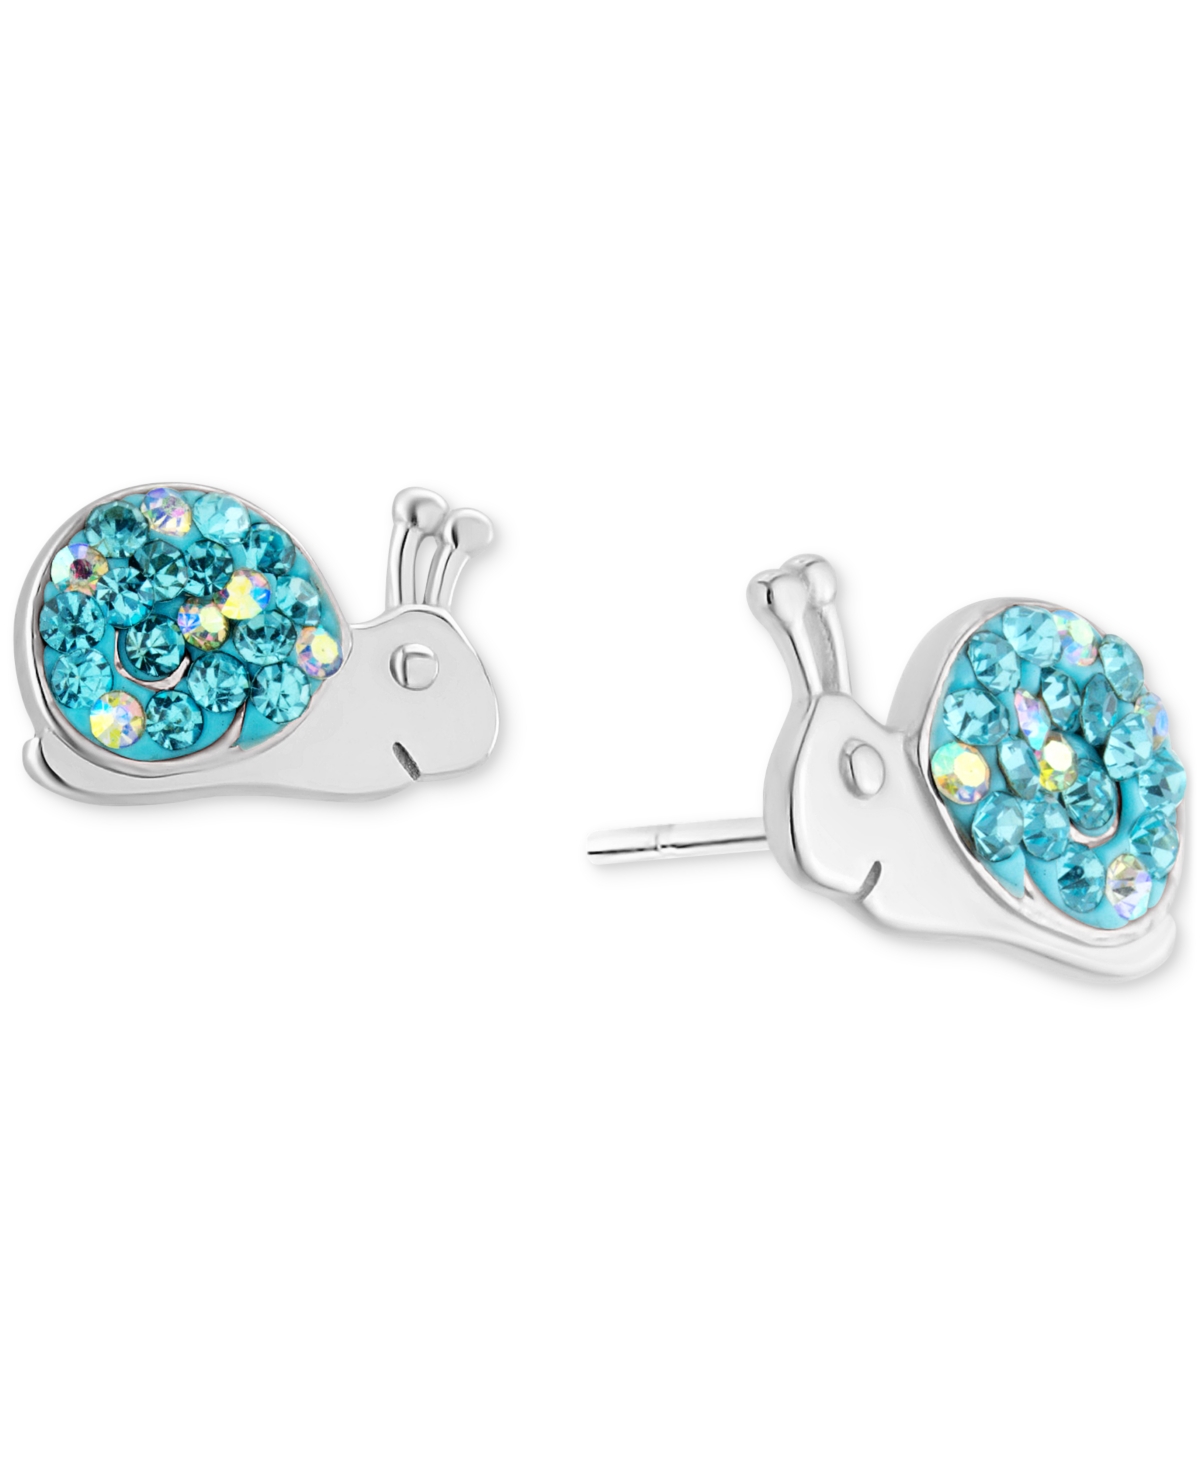 Giani Bernini Crystal Pave Snail Stud Earrings In Sterling Silver, Created For Macy's, Created For Macy's In Blue